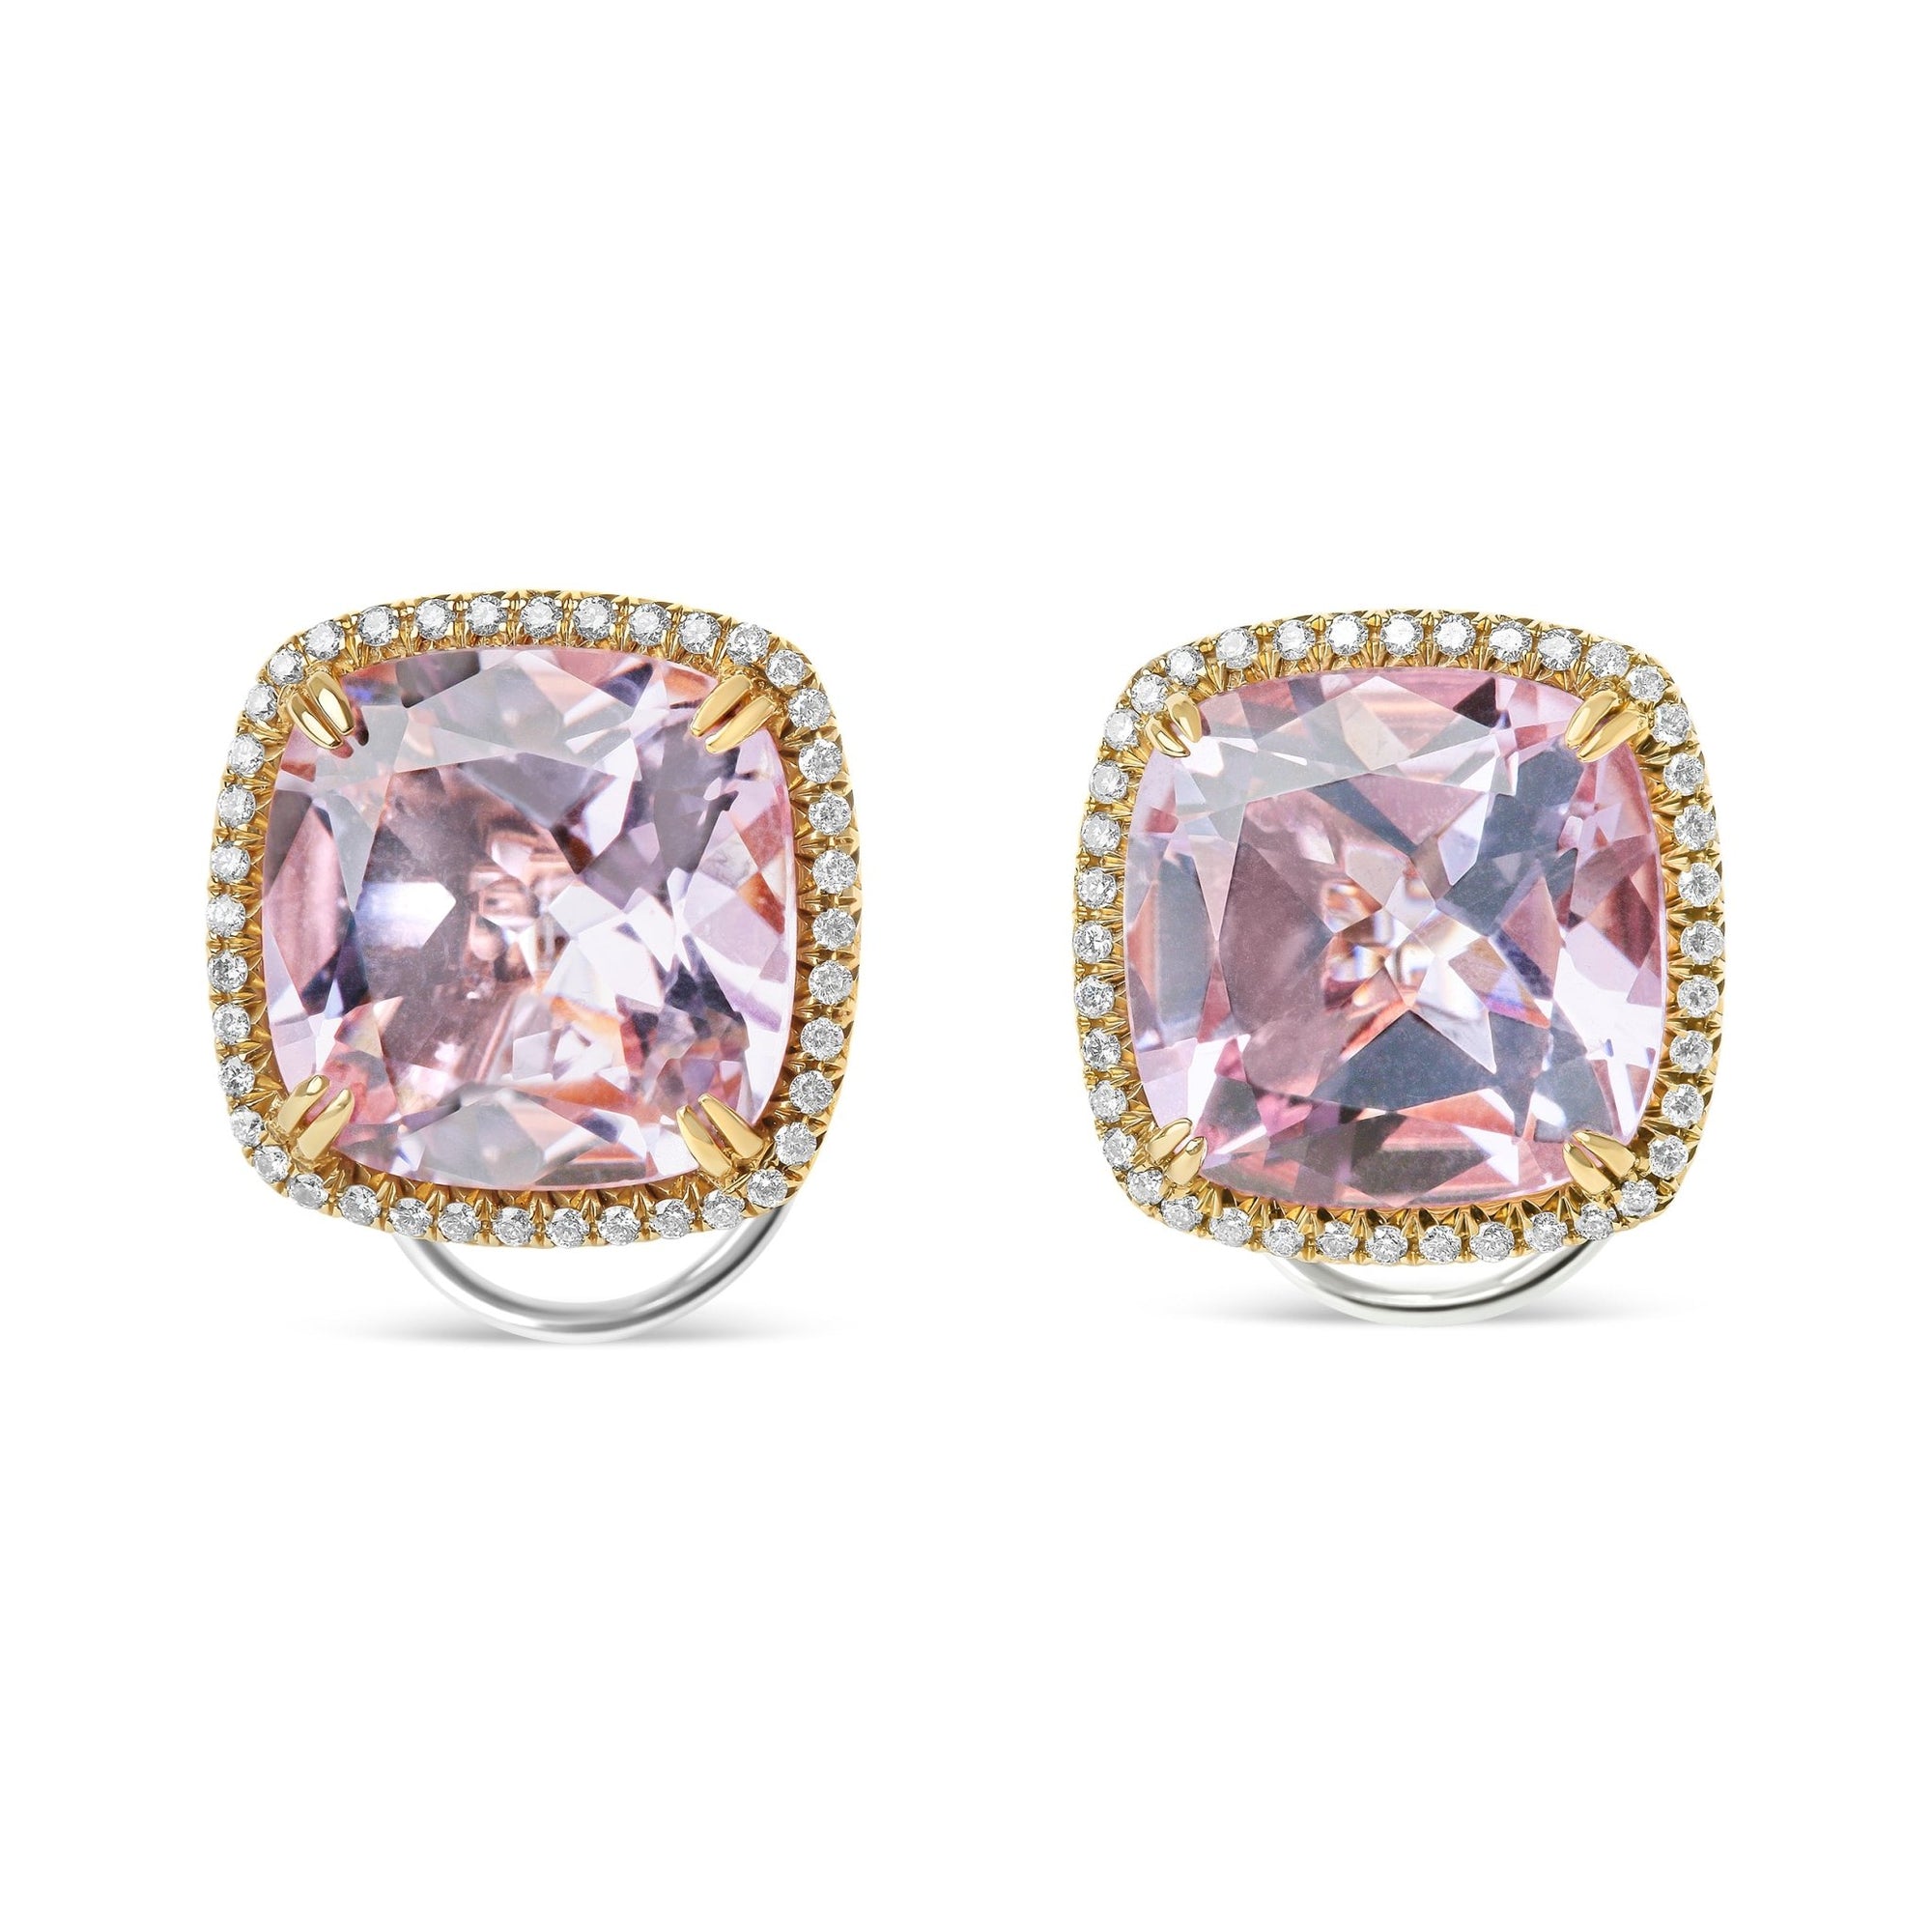 18K Rose and White Gold 9/10 Cttw Round Diamond and 15mm Cushion Cut Rose De France Pink Amethyst Gemstone Clip On Stud Earring (G-H Color, SI1-SI2 Clarity) - LinkagejewelrydesignLinkagejewelrydesign